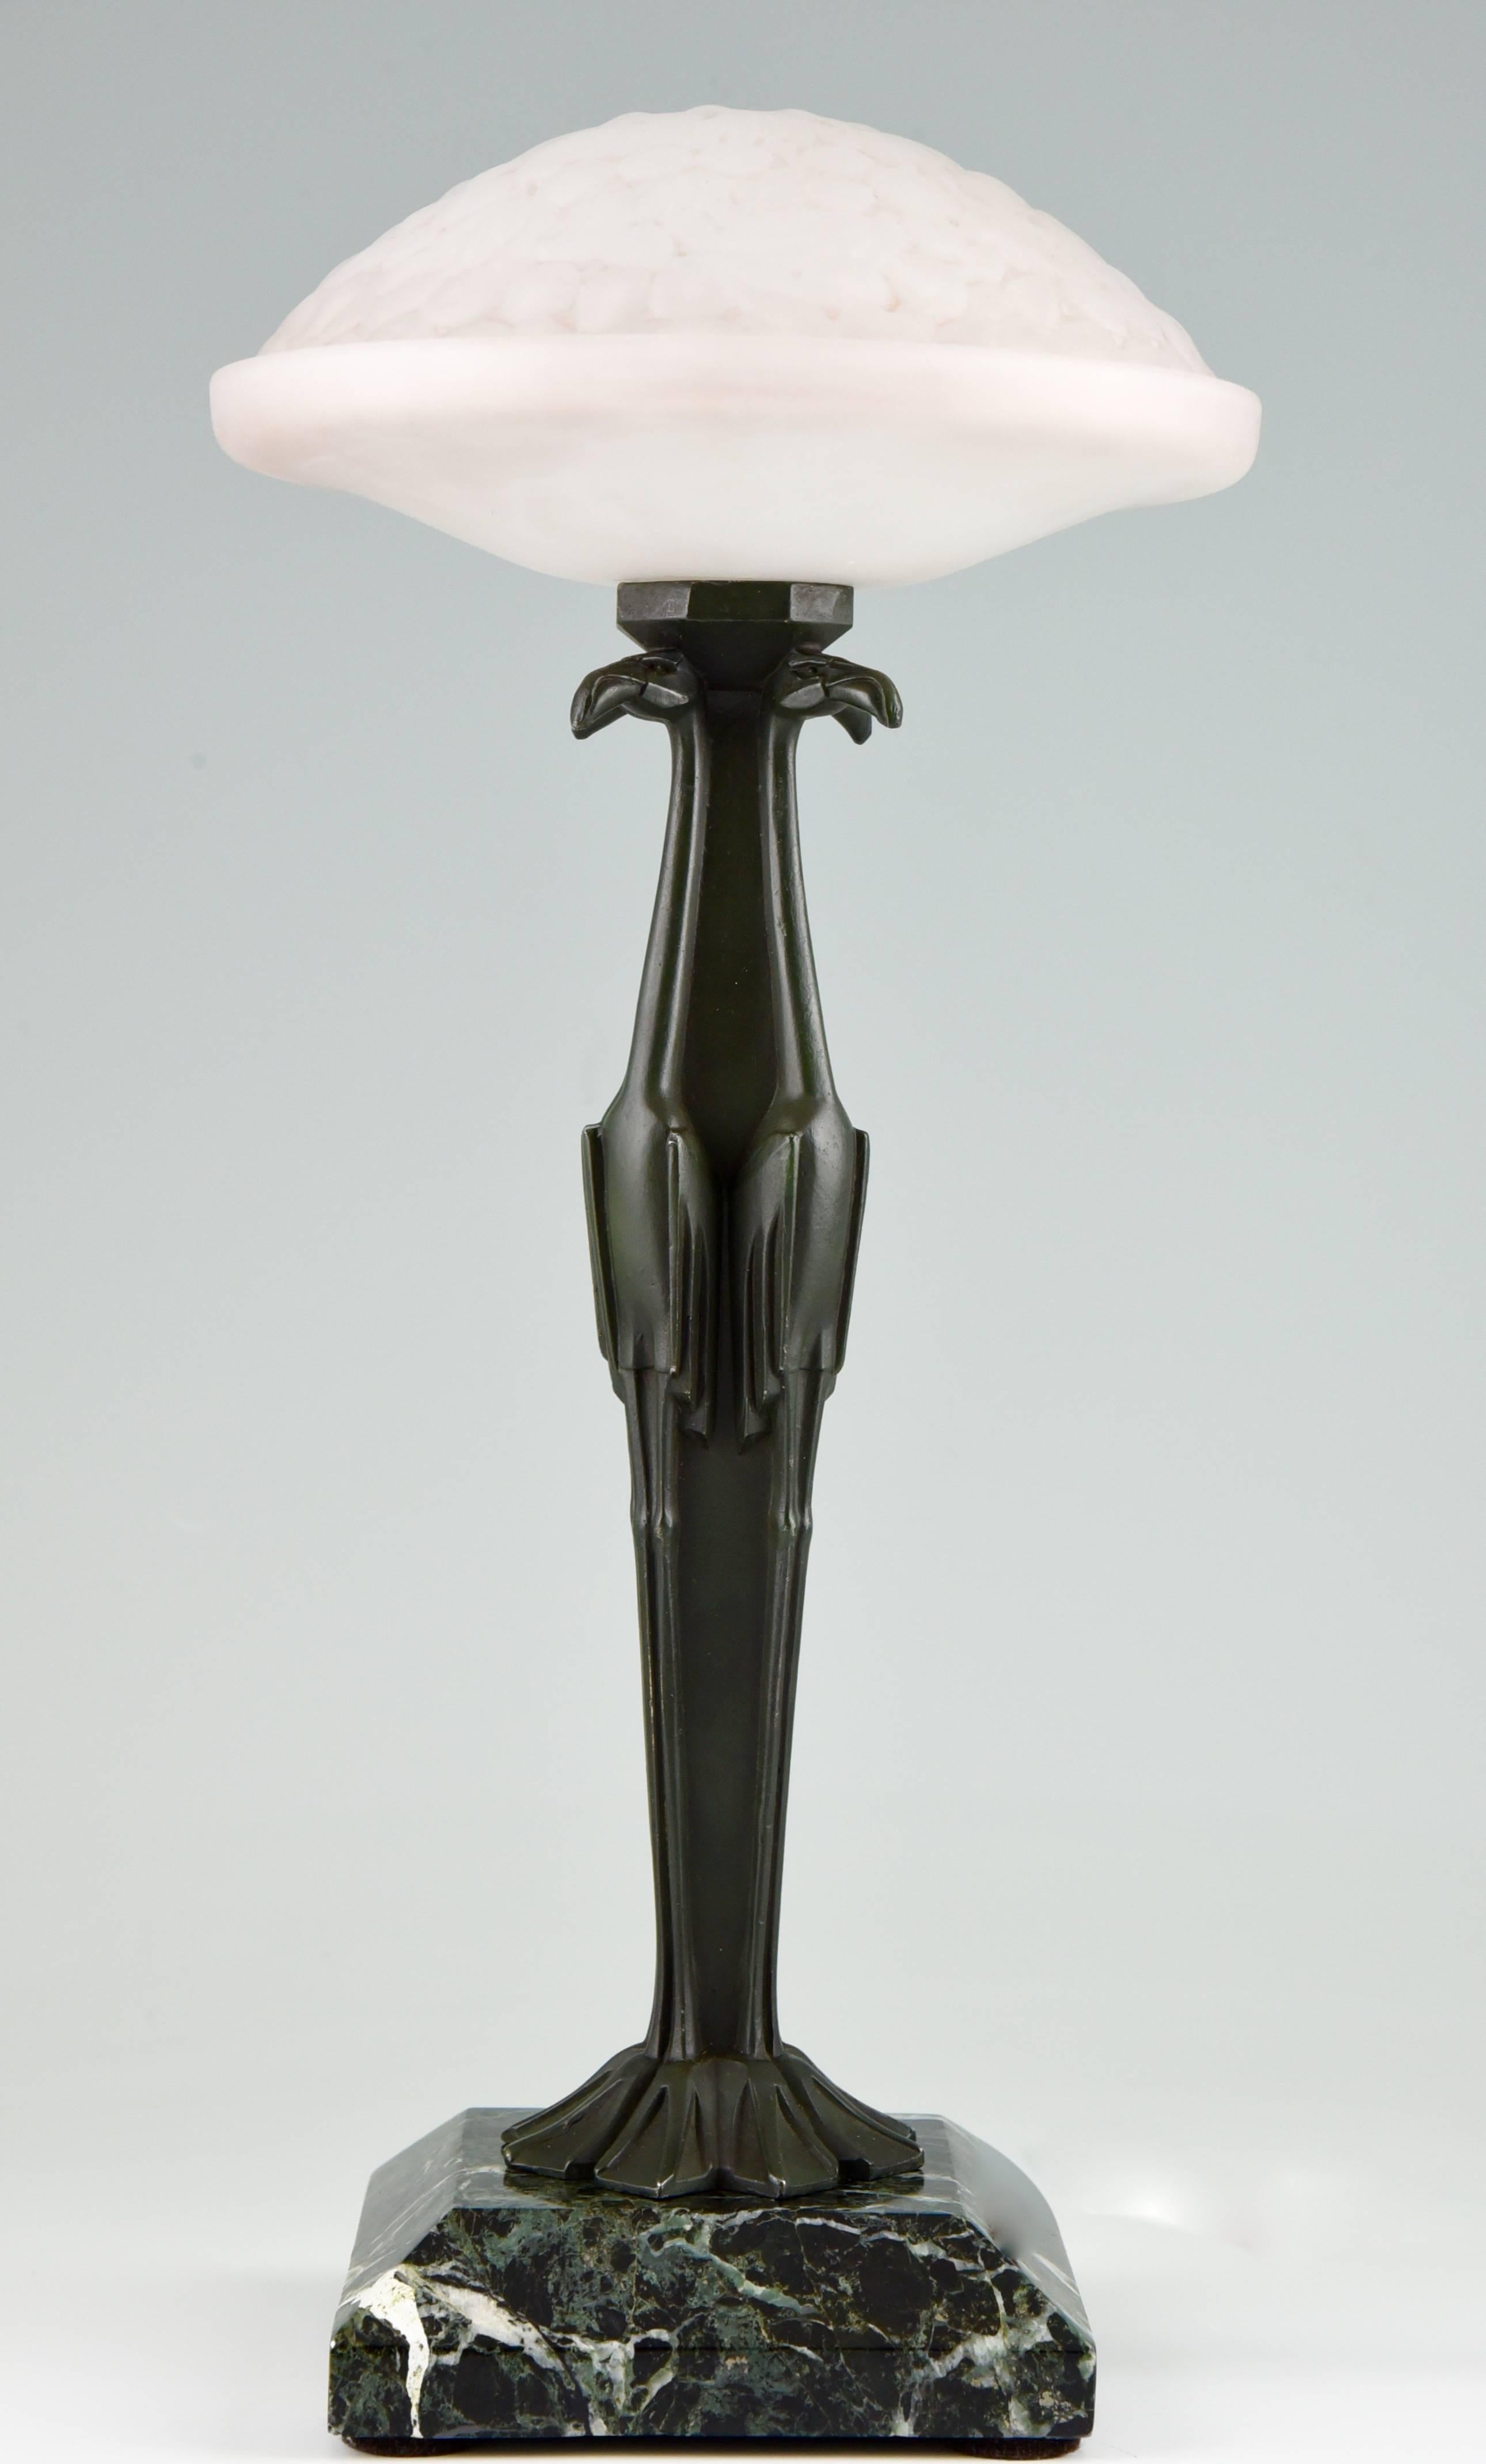 French Art Deco Flamingo Table Lamp by Max Le Verrier, 1930